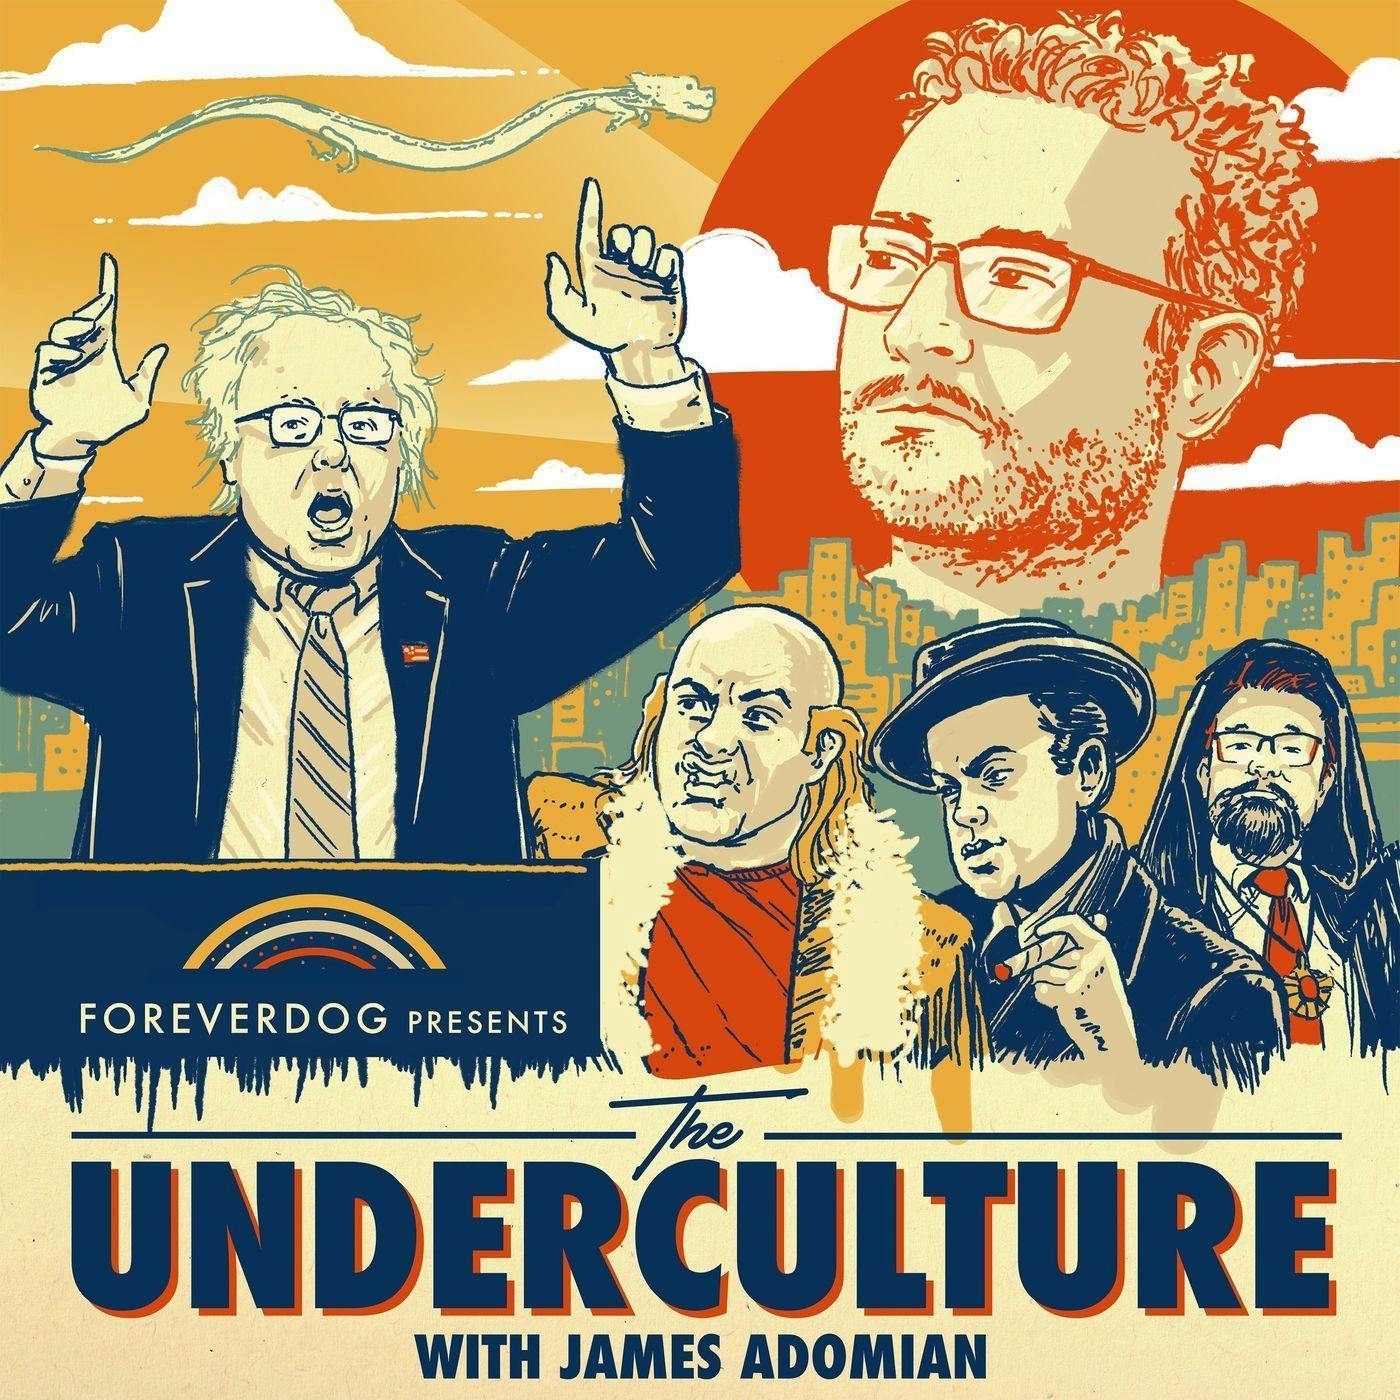 The Underculture Greatest Hits Vol. 1 (in compliance with House Judiciary Committee Subpoena HJ578495)